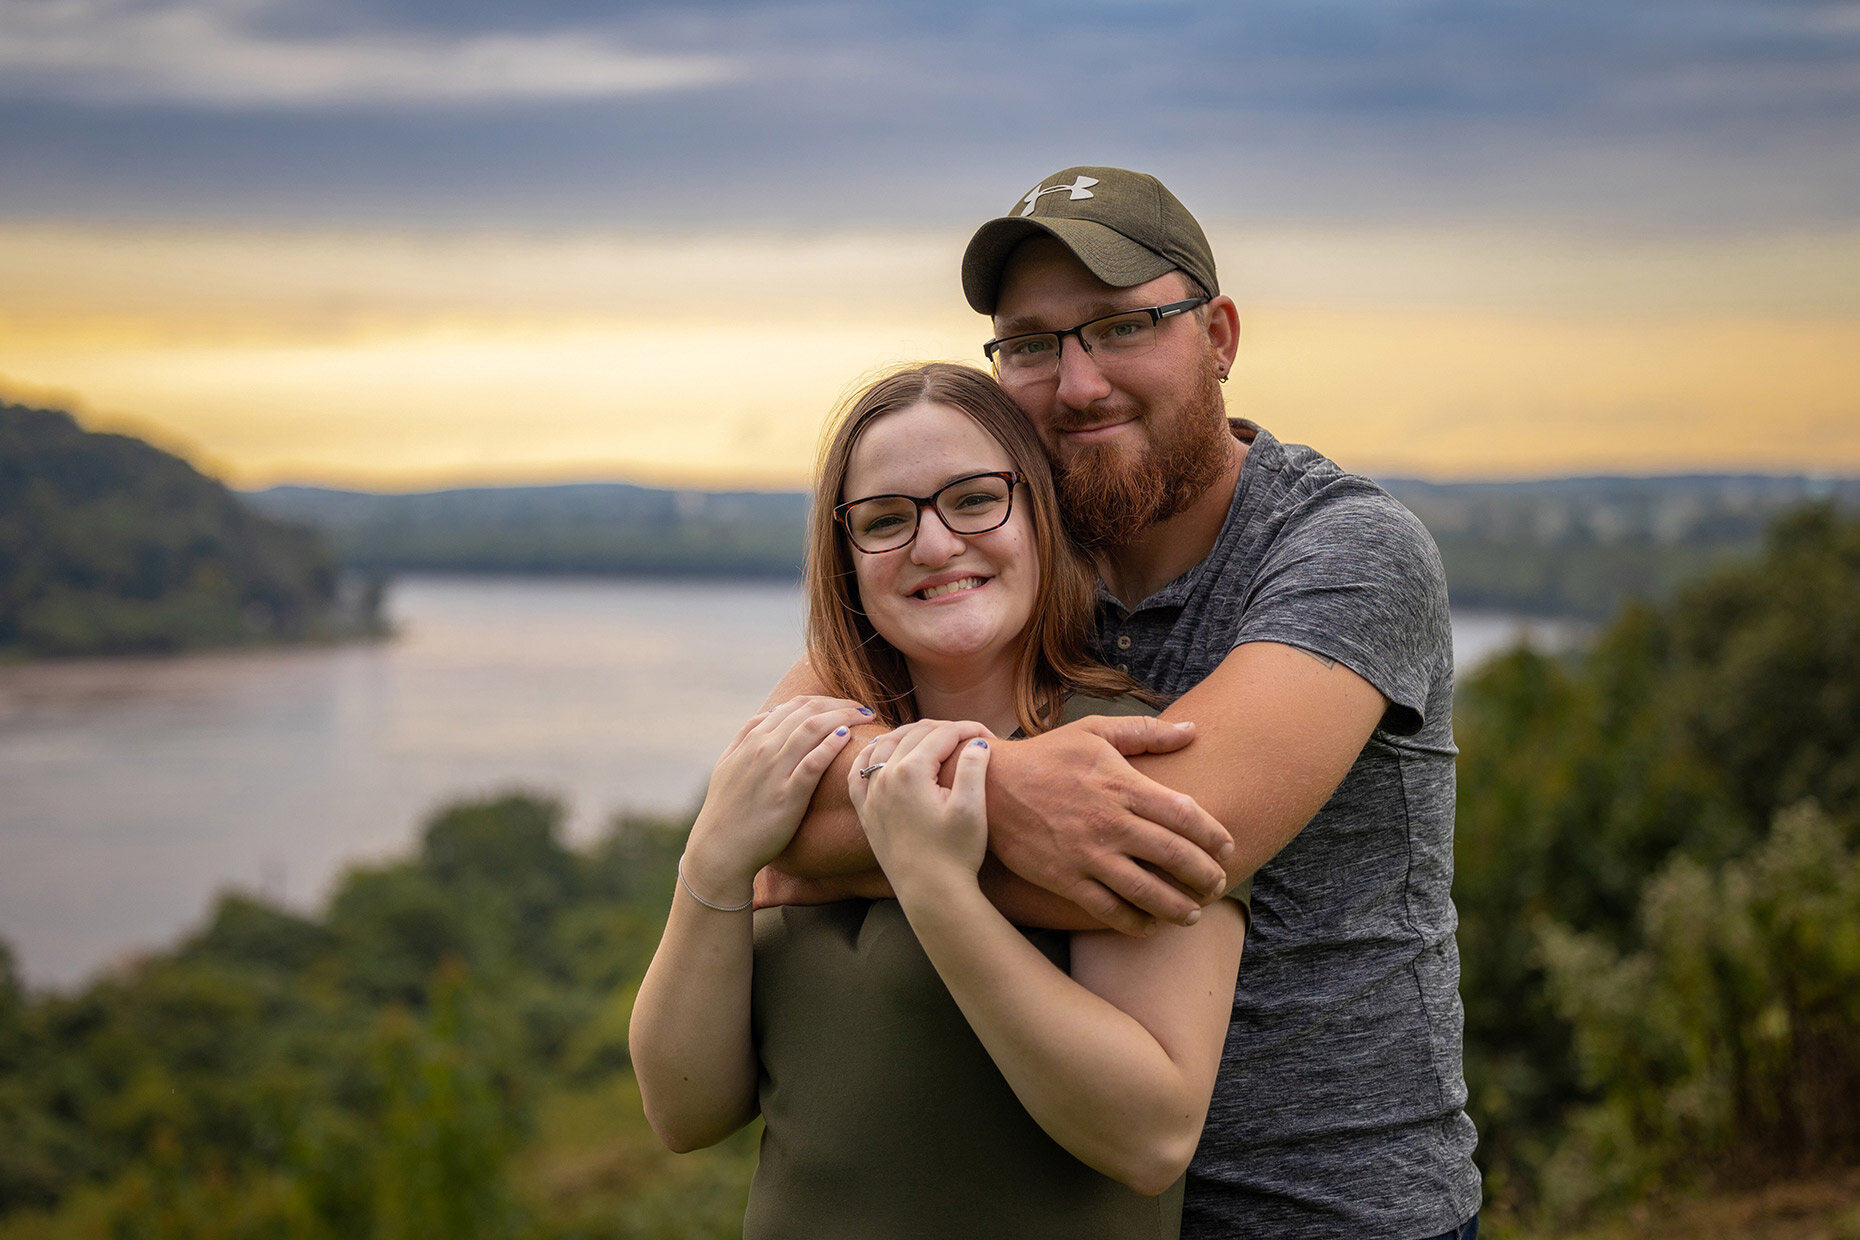 Engagement Photos at the Susquehanna River